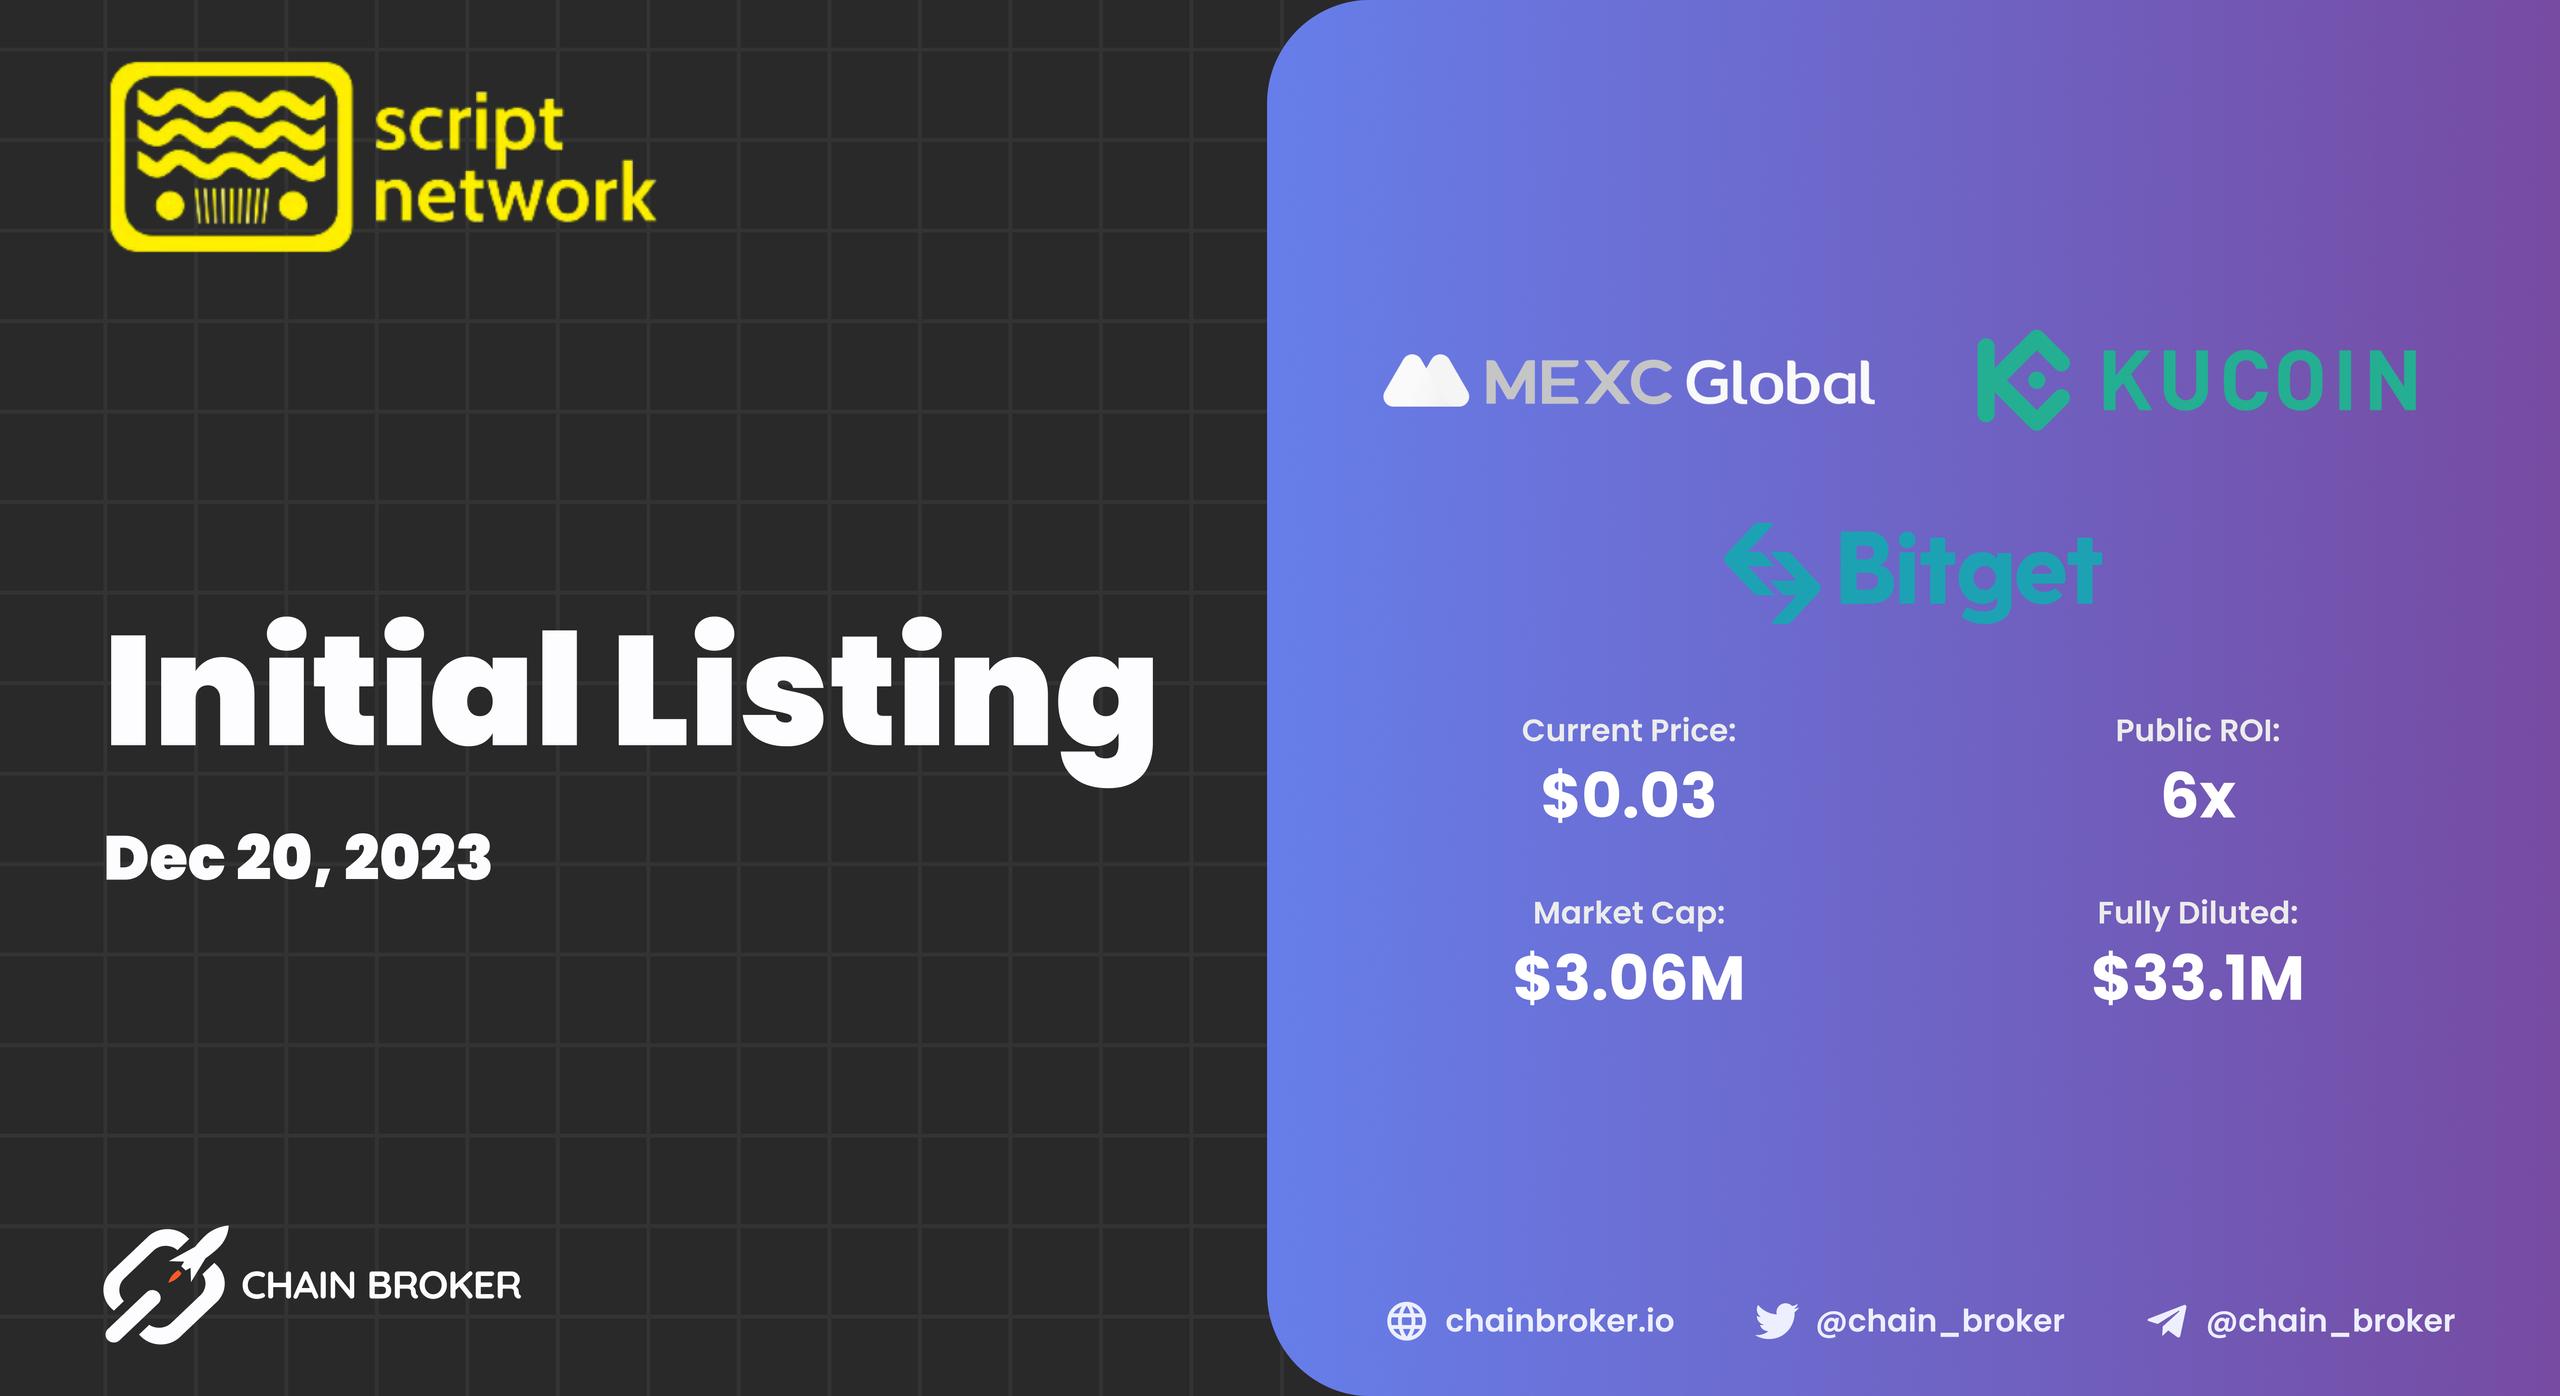 Script Network has Performed Initial Listing